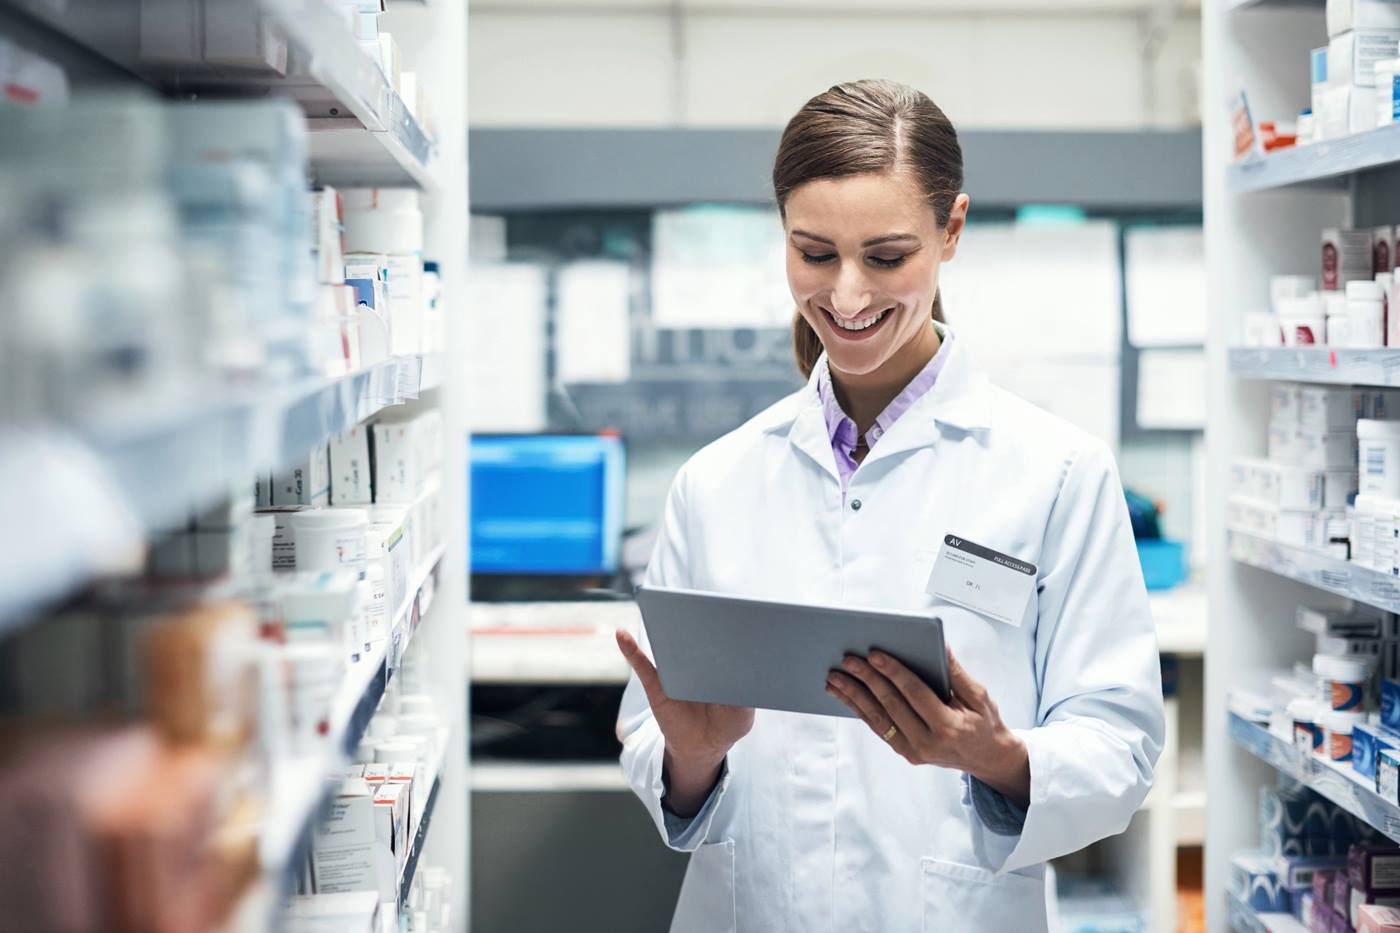 Pharmacist uses web-based software Delivery Manager